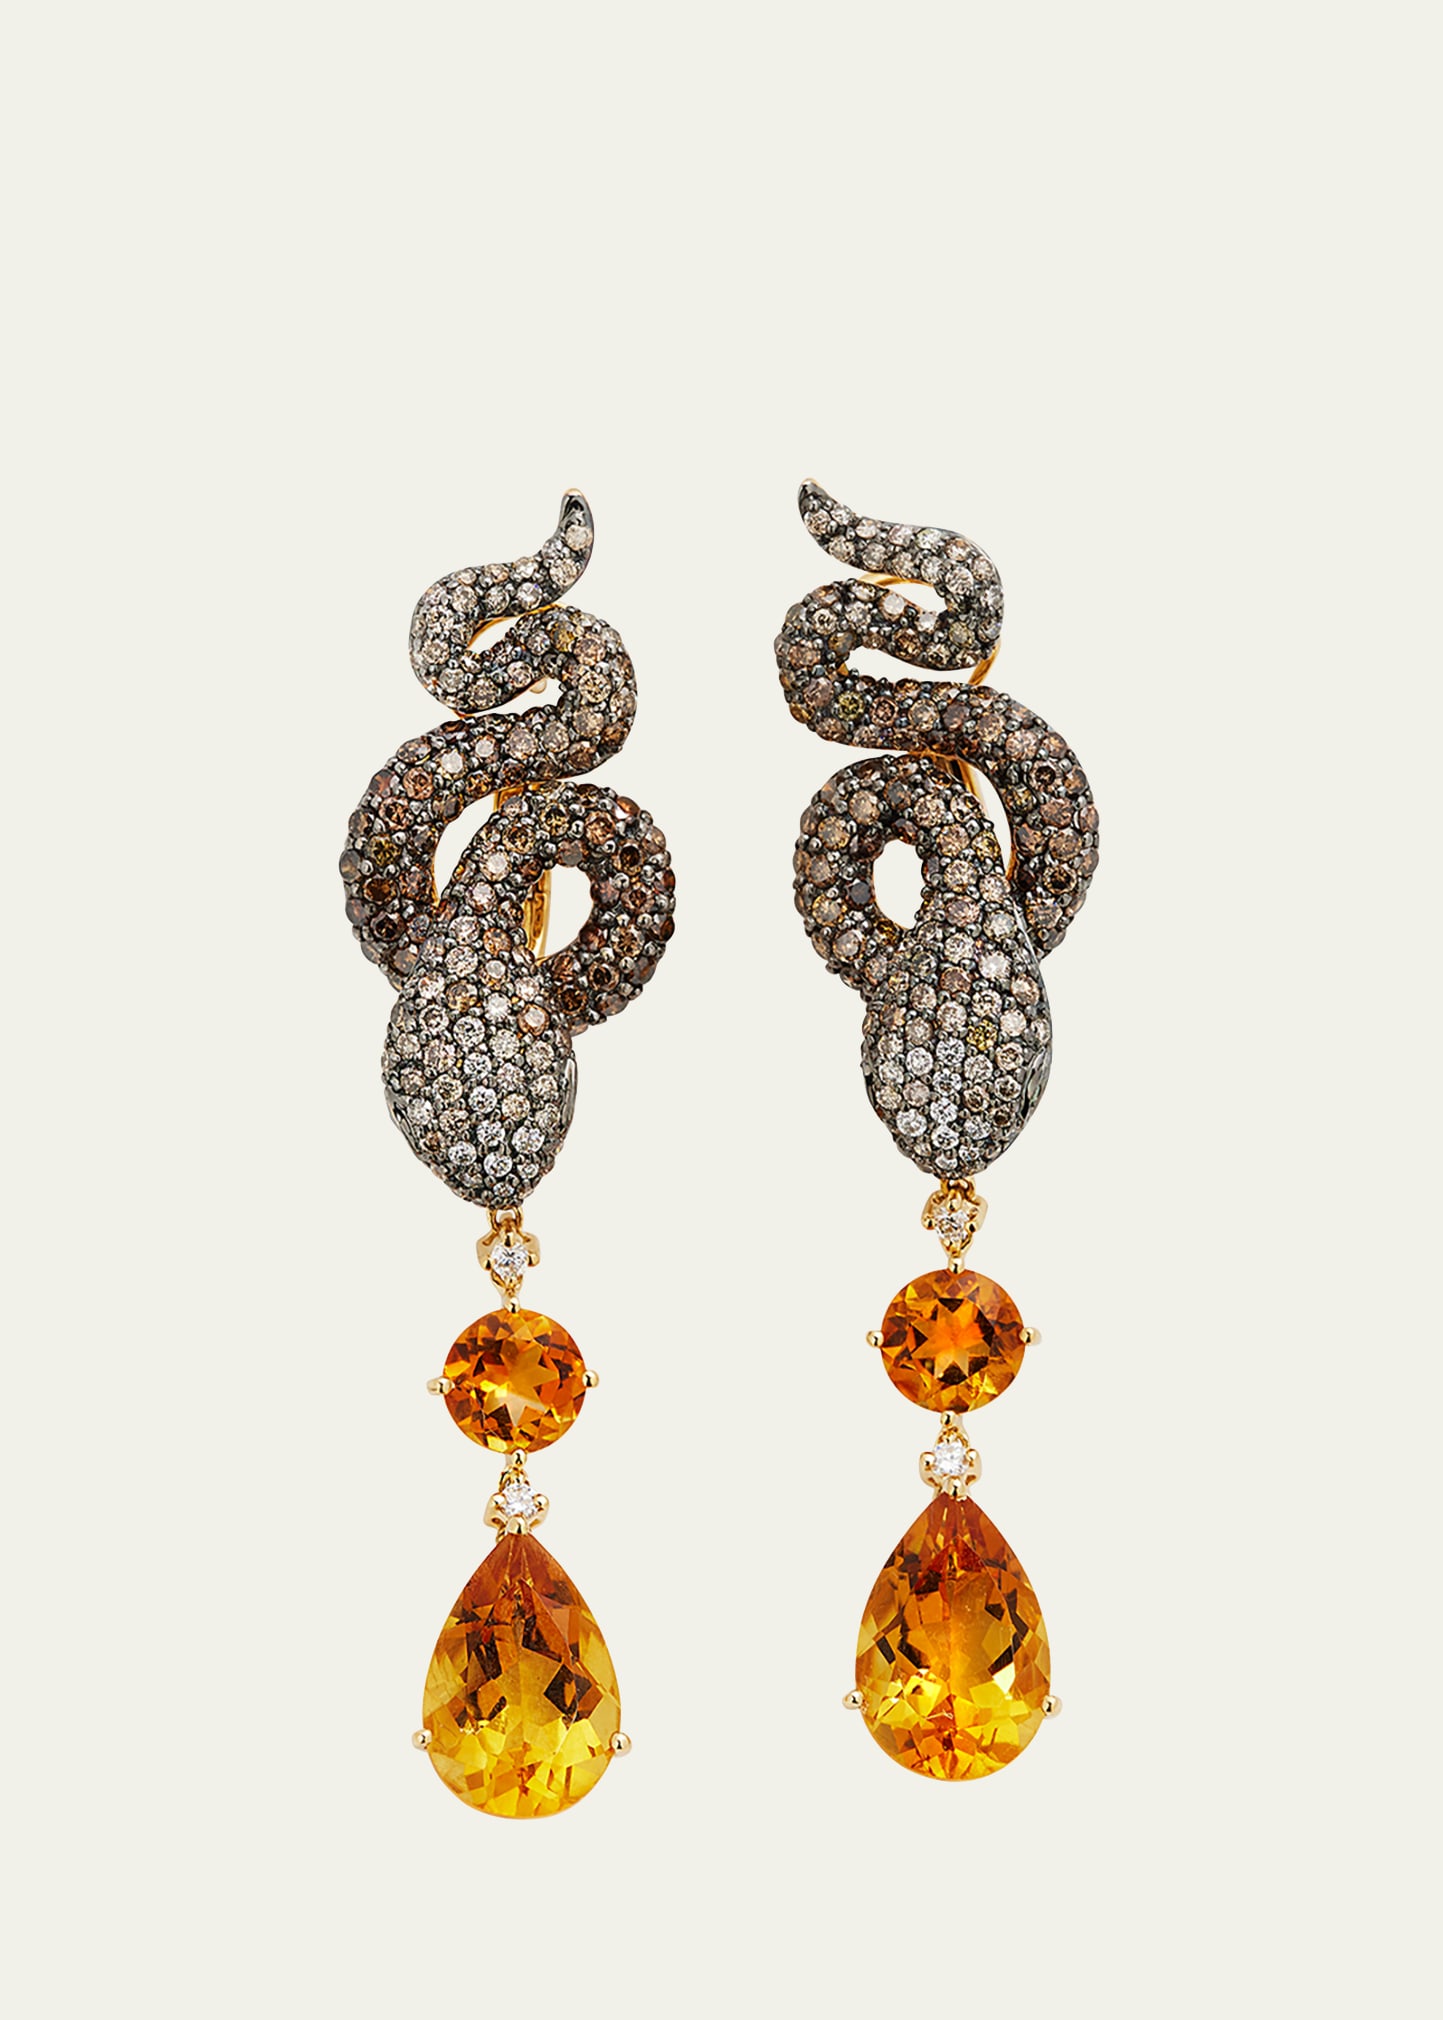 Yellow Gold Brown Diamond, Citrine, Green Garnet and White Diamond Earrings from The Snake Collection